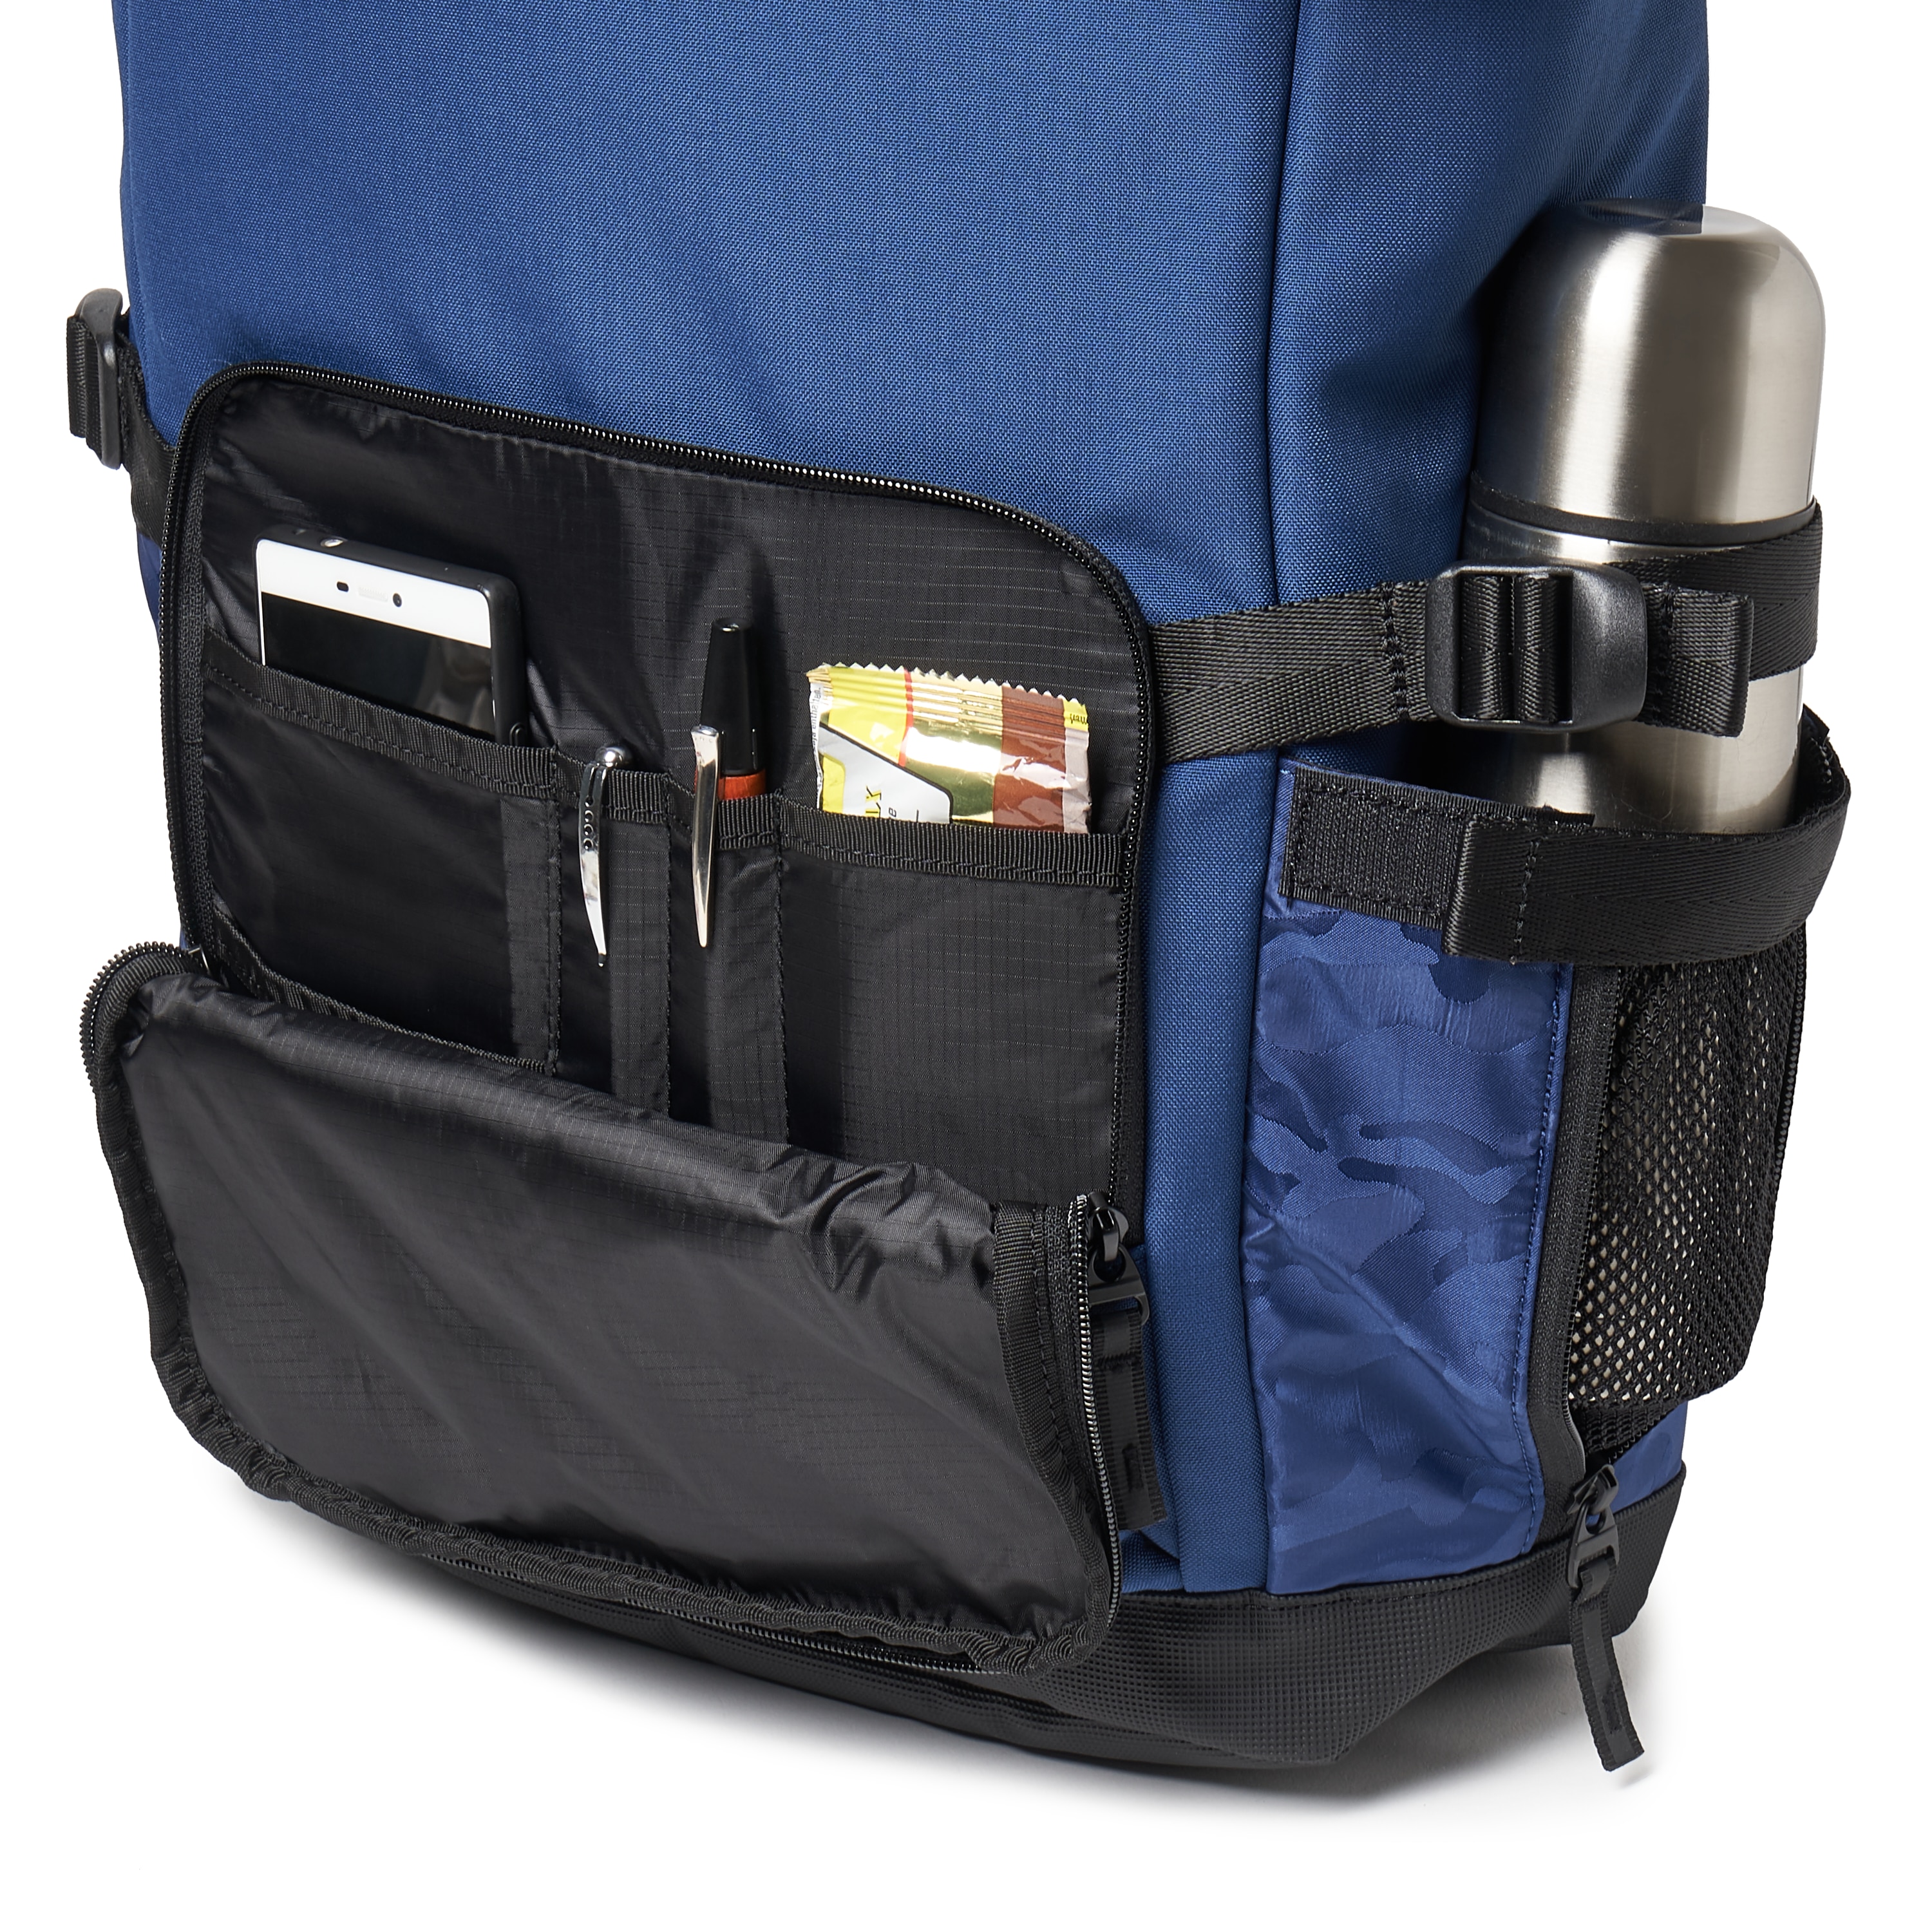 utility rolled up backpack